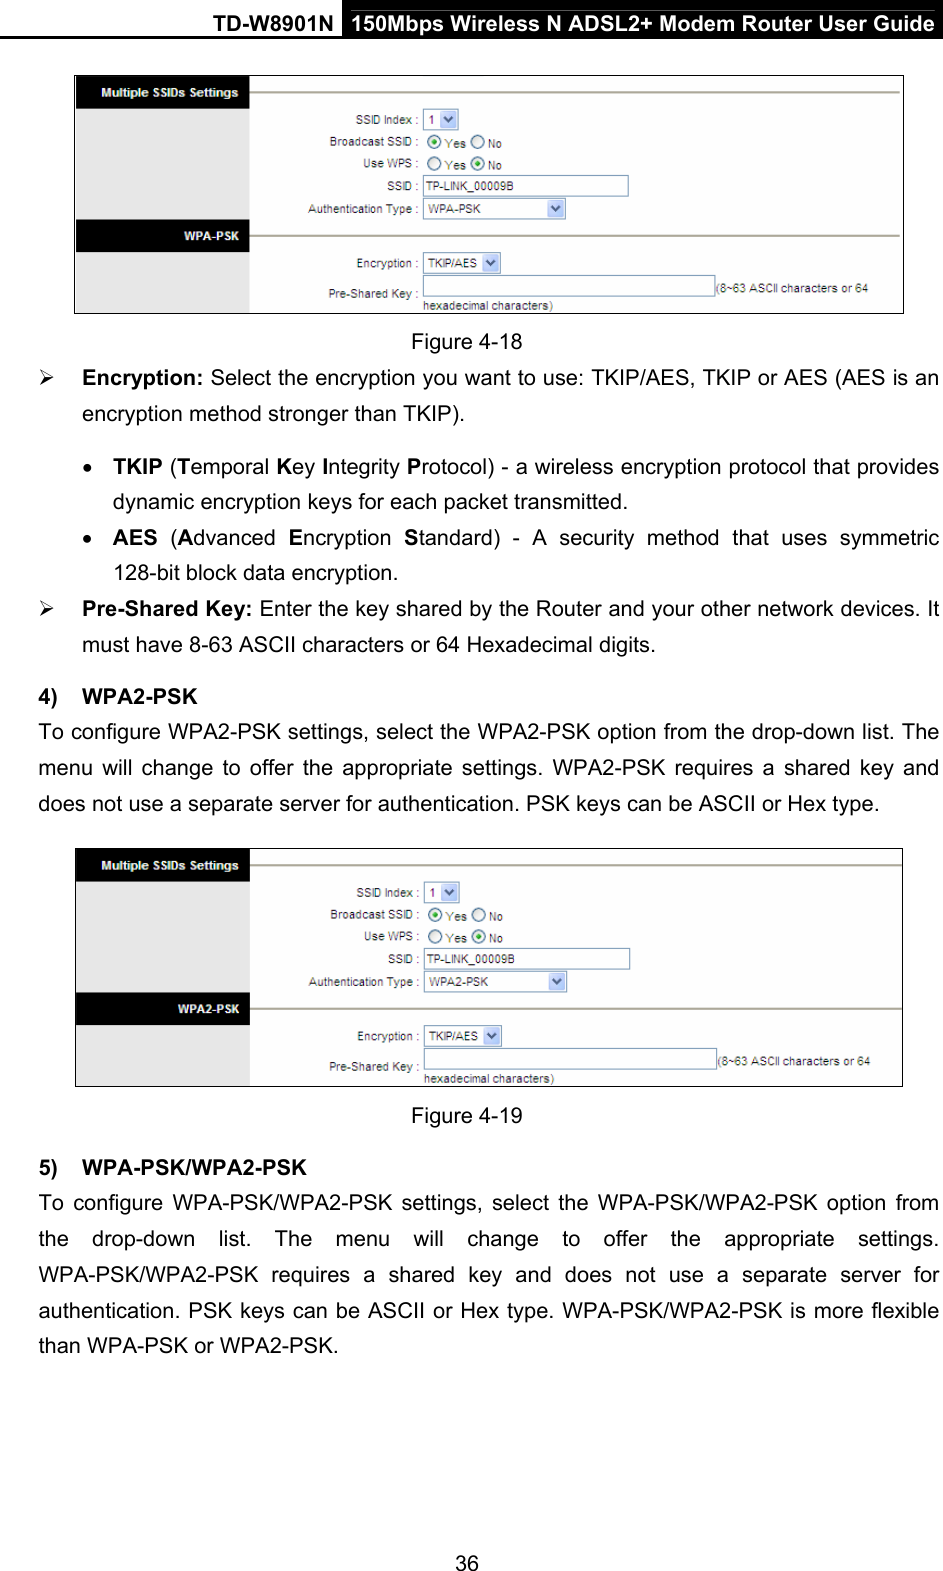 TD-W8901N  150Mbps Wireless N ADSL2+ Modem Router User Guide 36  Figure 4-18  Encryption: Select the encryption you want to use: TKIP/AES, TKIP or AES (AES is an encryption method stronger than TKIP).  TKIP (Temporal Key Integrity Protocol) - a wireless encryption protocol that provides dynamic encryption keys for each packet transmitted.  AES (Advanced  Encryption  Standard) - A security method that uses symmetric 128-bit block data encryption.  Pre-Shared Key: Enter the key shared by the Router and your other network devices. It must have 8-63 ASCII characters or 64 Hexadecimal digits. 4) WPA2-PSK To configure WPA2-PSK settings, select the WPA2-PSK option from the drop-down list. The menu will change to offer the appropriate settings. WPA2-PSK requires a shared key and does not use a separate server for authentication. PSK keys can be ASCII or Hex type.  Figure 4-19 5) WPA-PSK/WPA2-PSK To configure WPA-PSK/WPA2-PSK settings, select the WPA-PSK/WPA2-PSK option from the drop-down list. The menu will change to offer the appropriate settings. WPA-PSK/WPA2-PSK requires a shared key and does not use a separate server for authentication. PSK keys can be ASCII or Hex type. WPA-PSK/WPA2-PSK is more flexible than WPA-PSK or WPA2-PSK. 